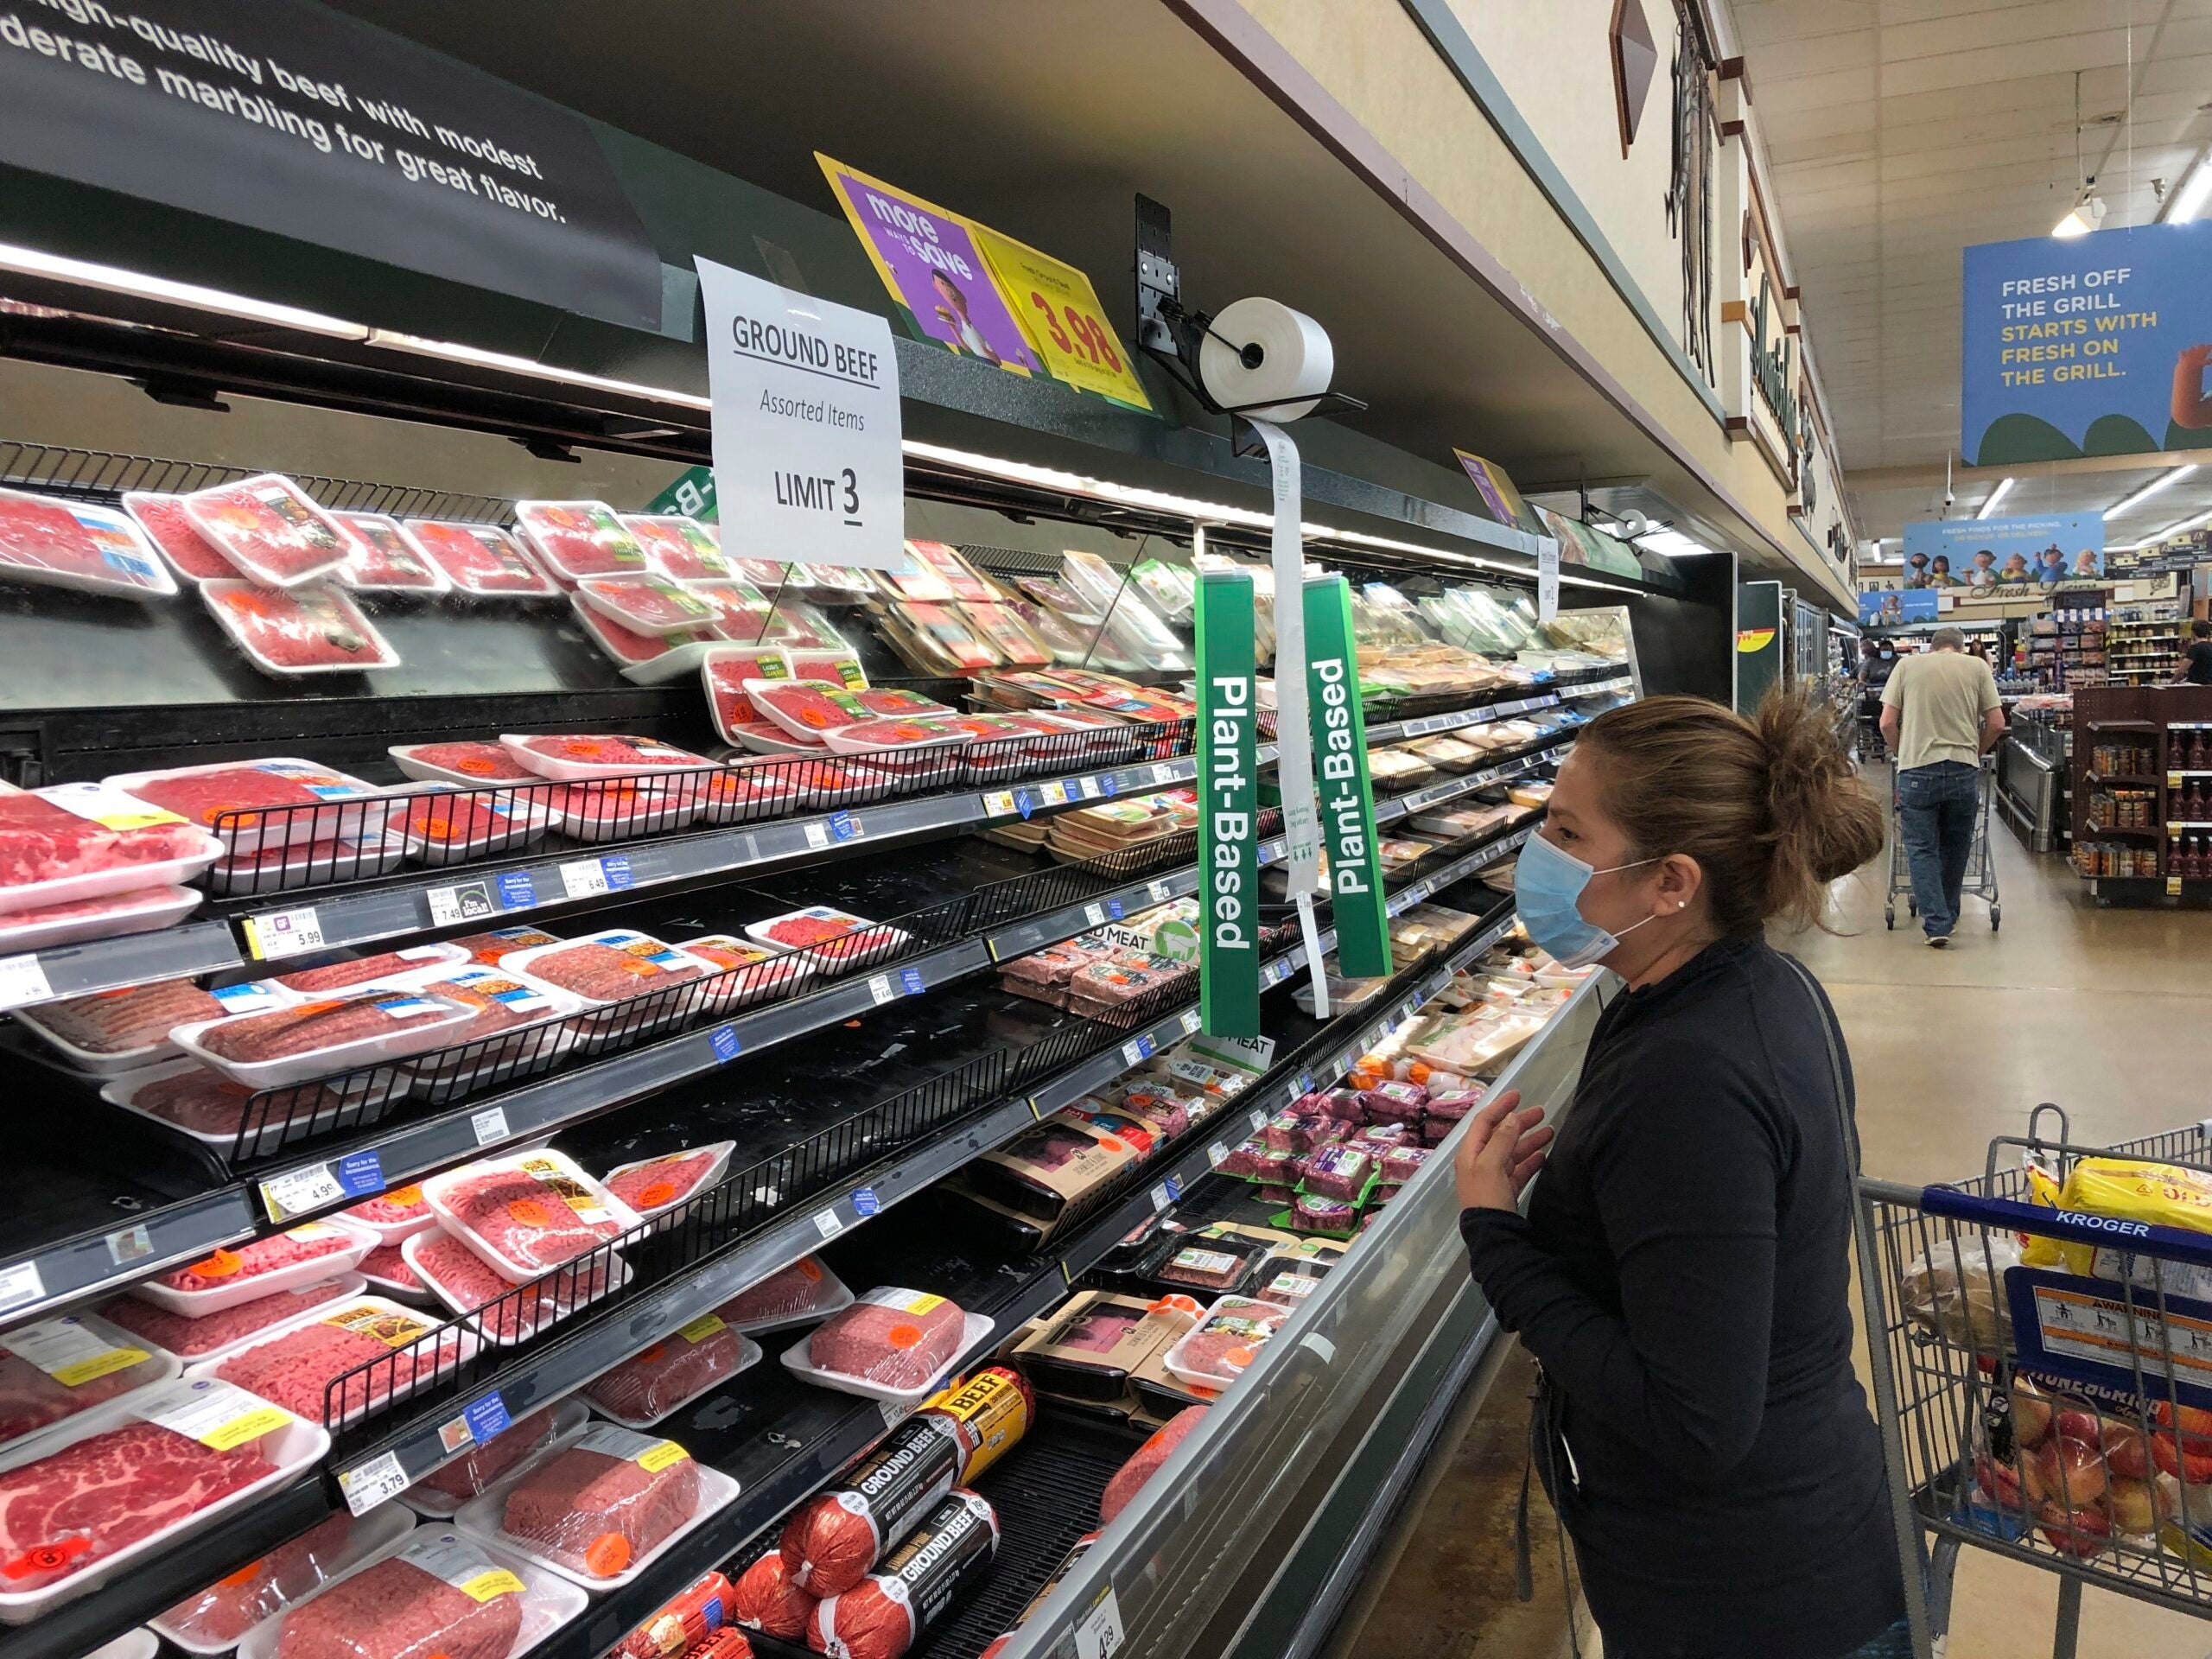 Here are the meat limits at some local supermarket chains